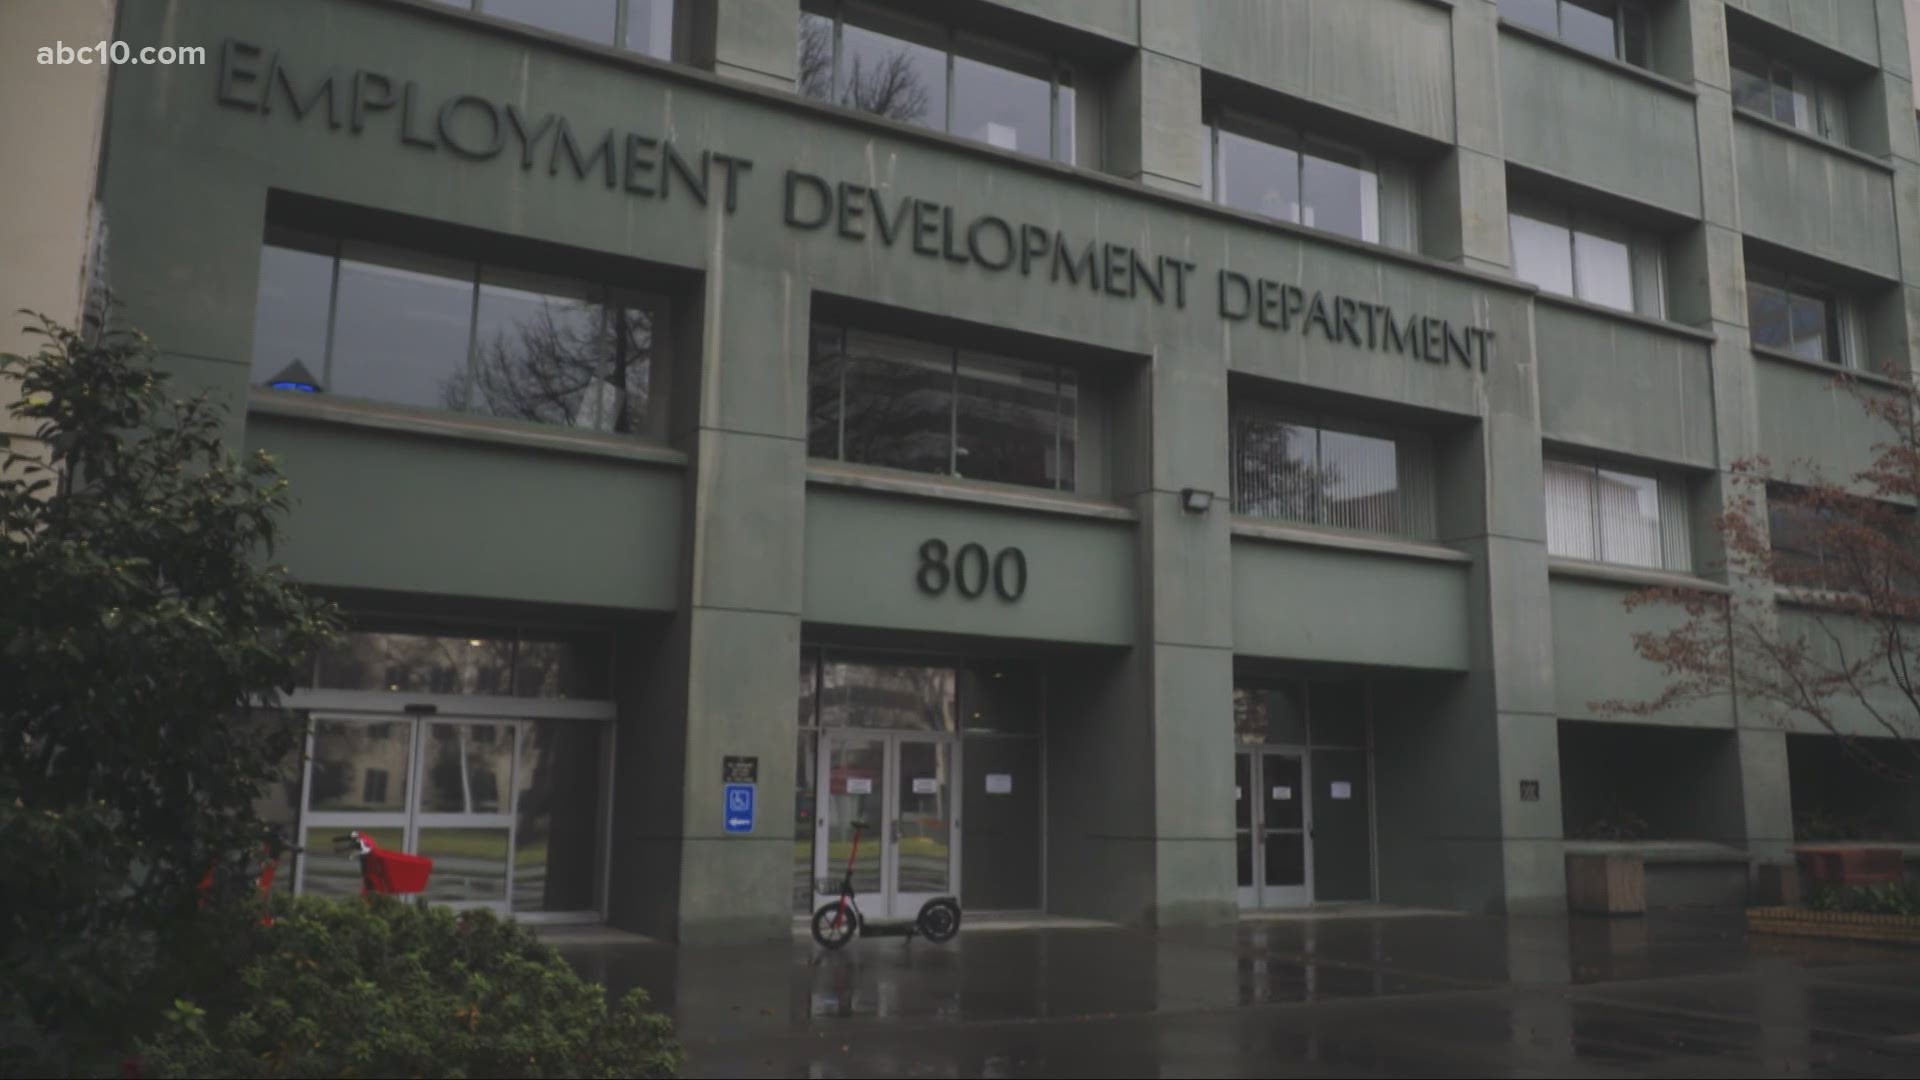 The EDD is working to make changes to stop fraud and get unemployment payments out, but the wait is still months long for hundreds of thousands of people.